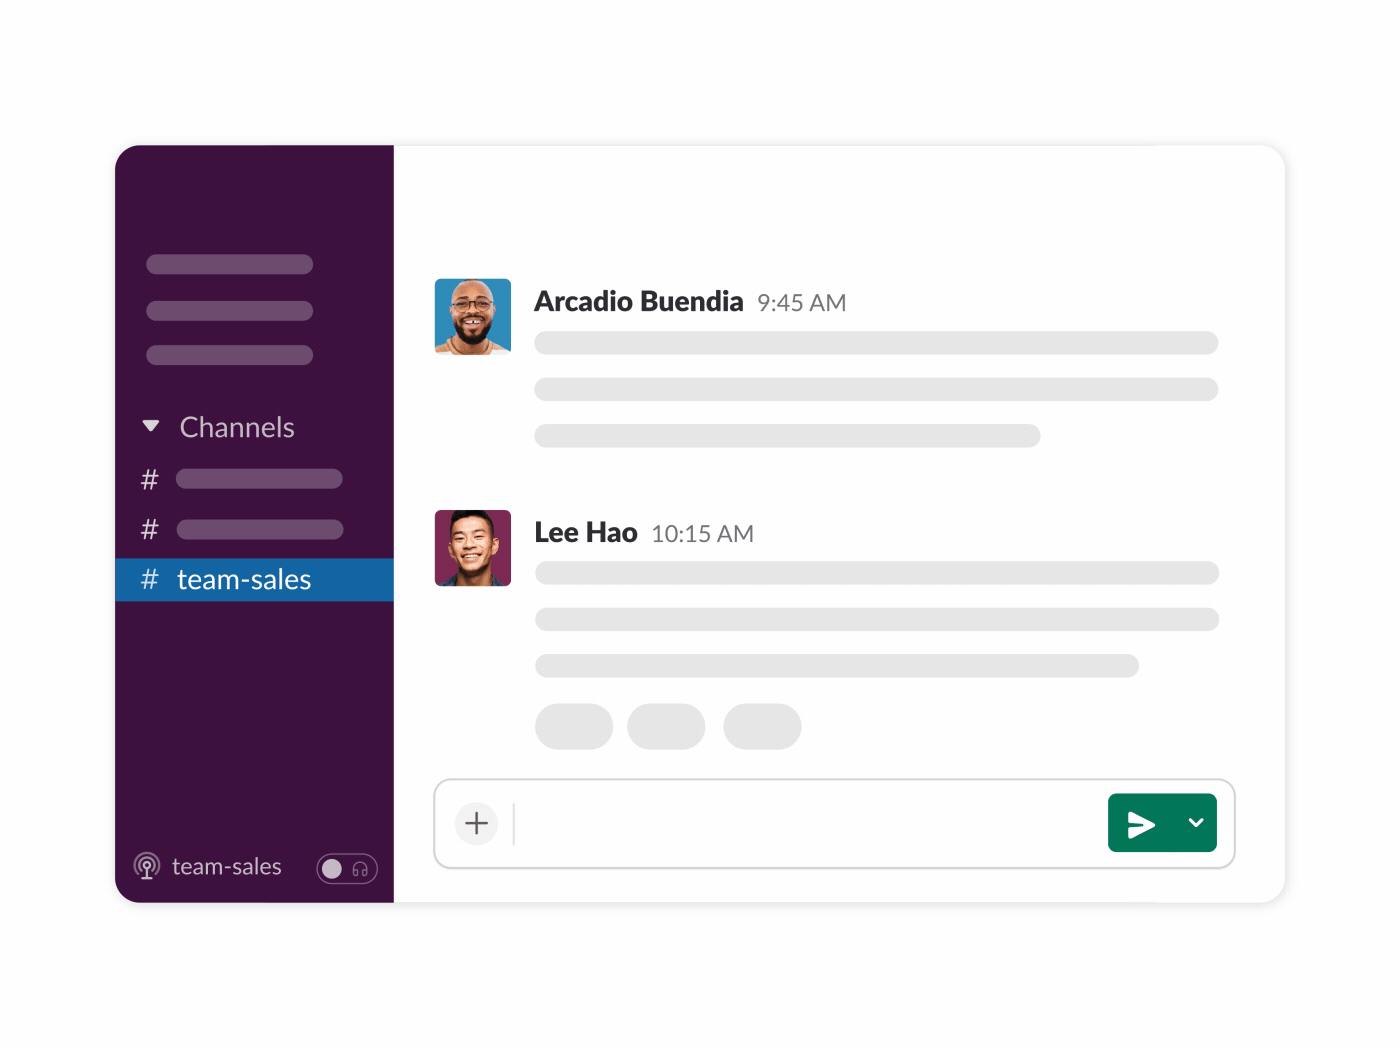 starting a huddle in a Slack channel to talk live and share your screen